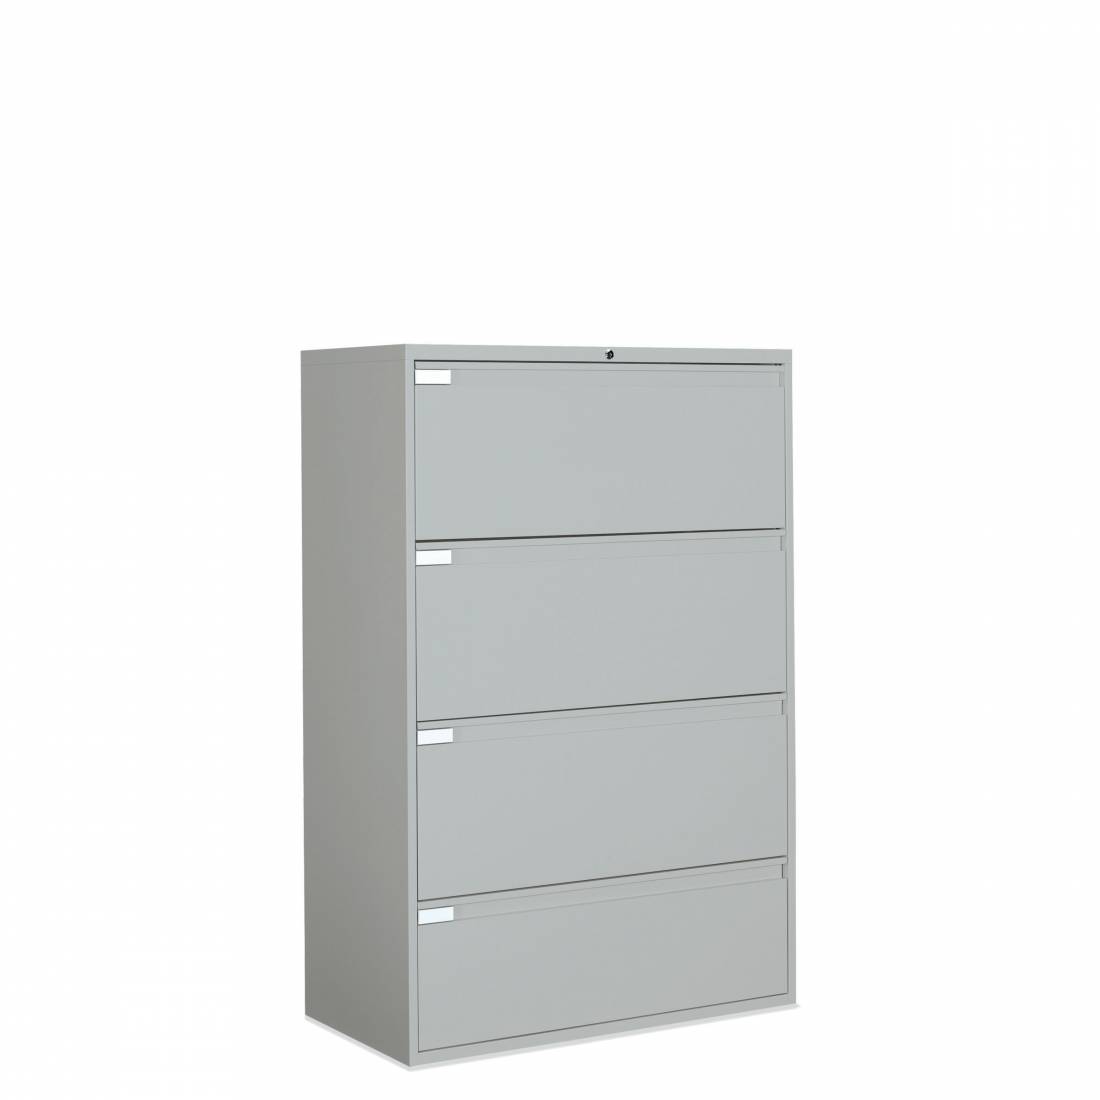 36”W 4 Drawer Lateral File